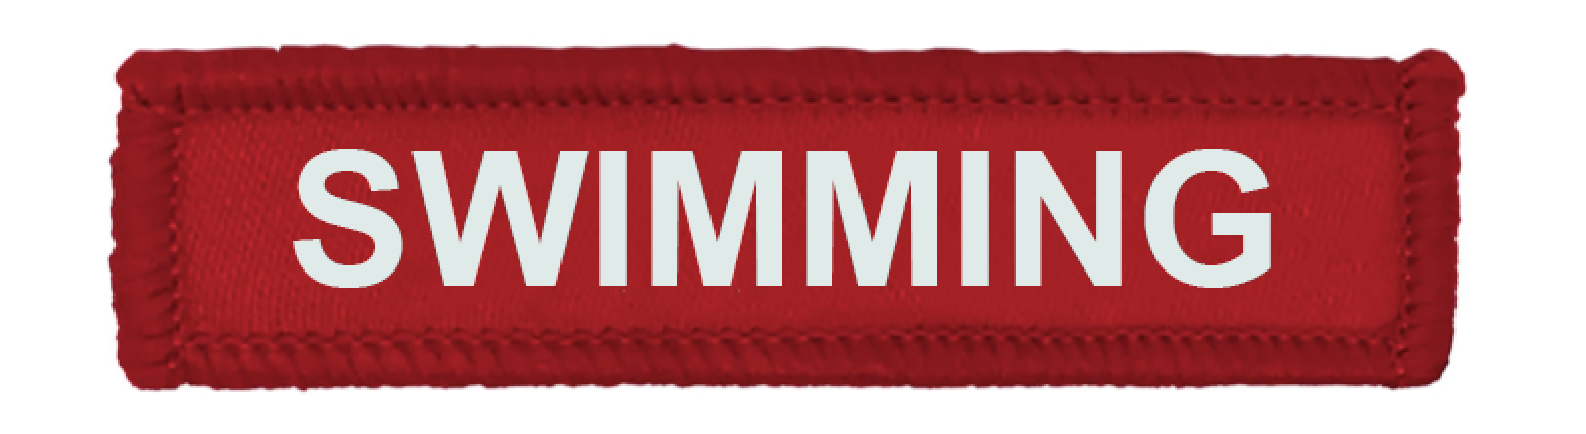 swimming patches red